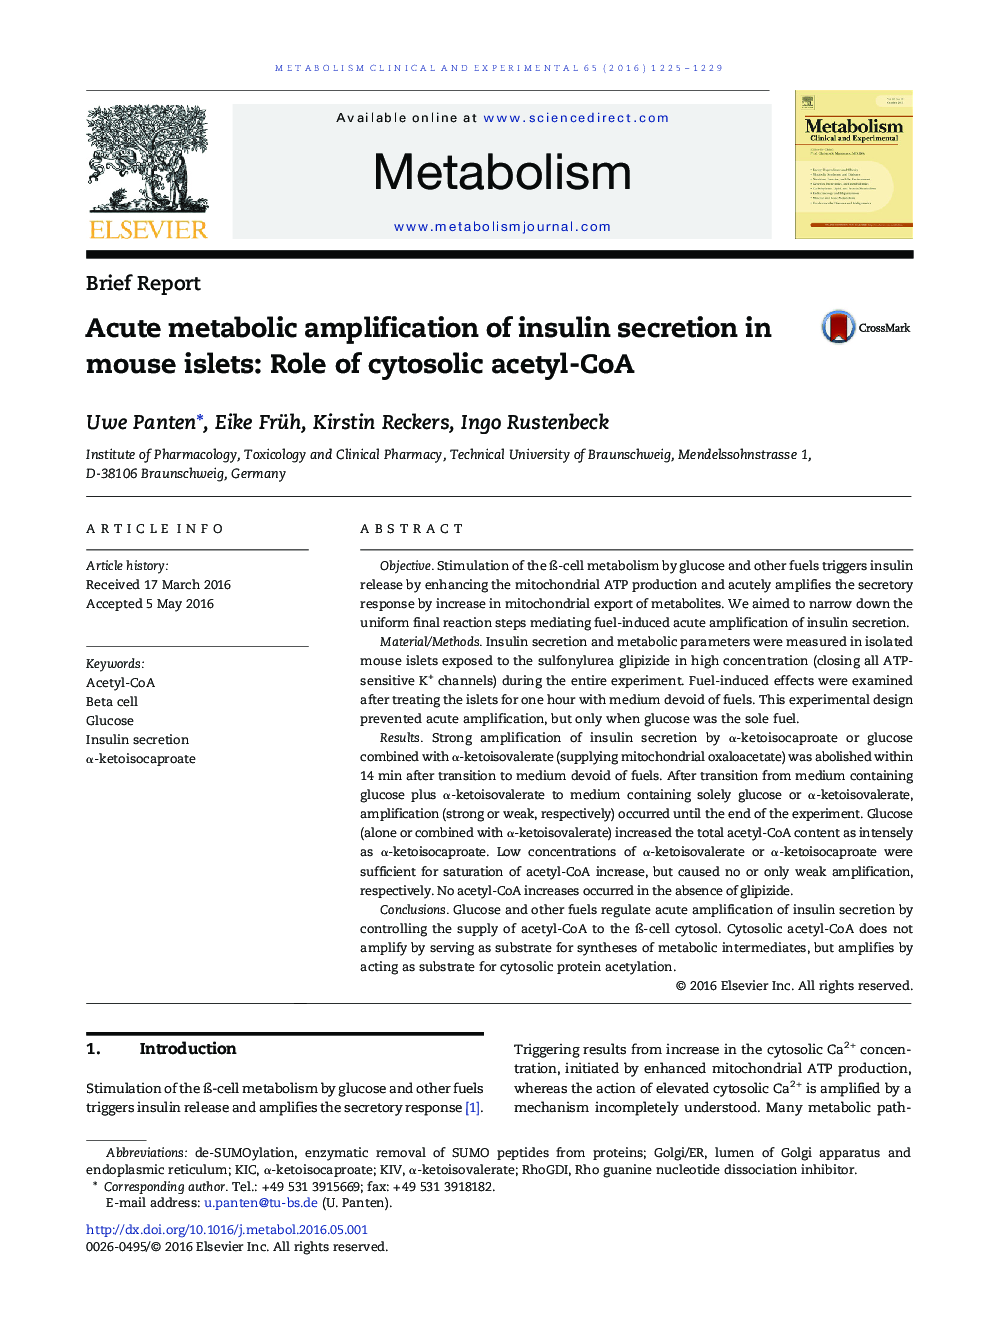 Brief ReportAcute metabolic amplification of insulin secretion in mouse islets: Role of cytosolic acetyl-CoA